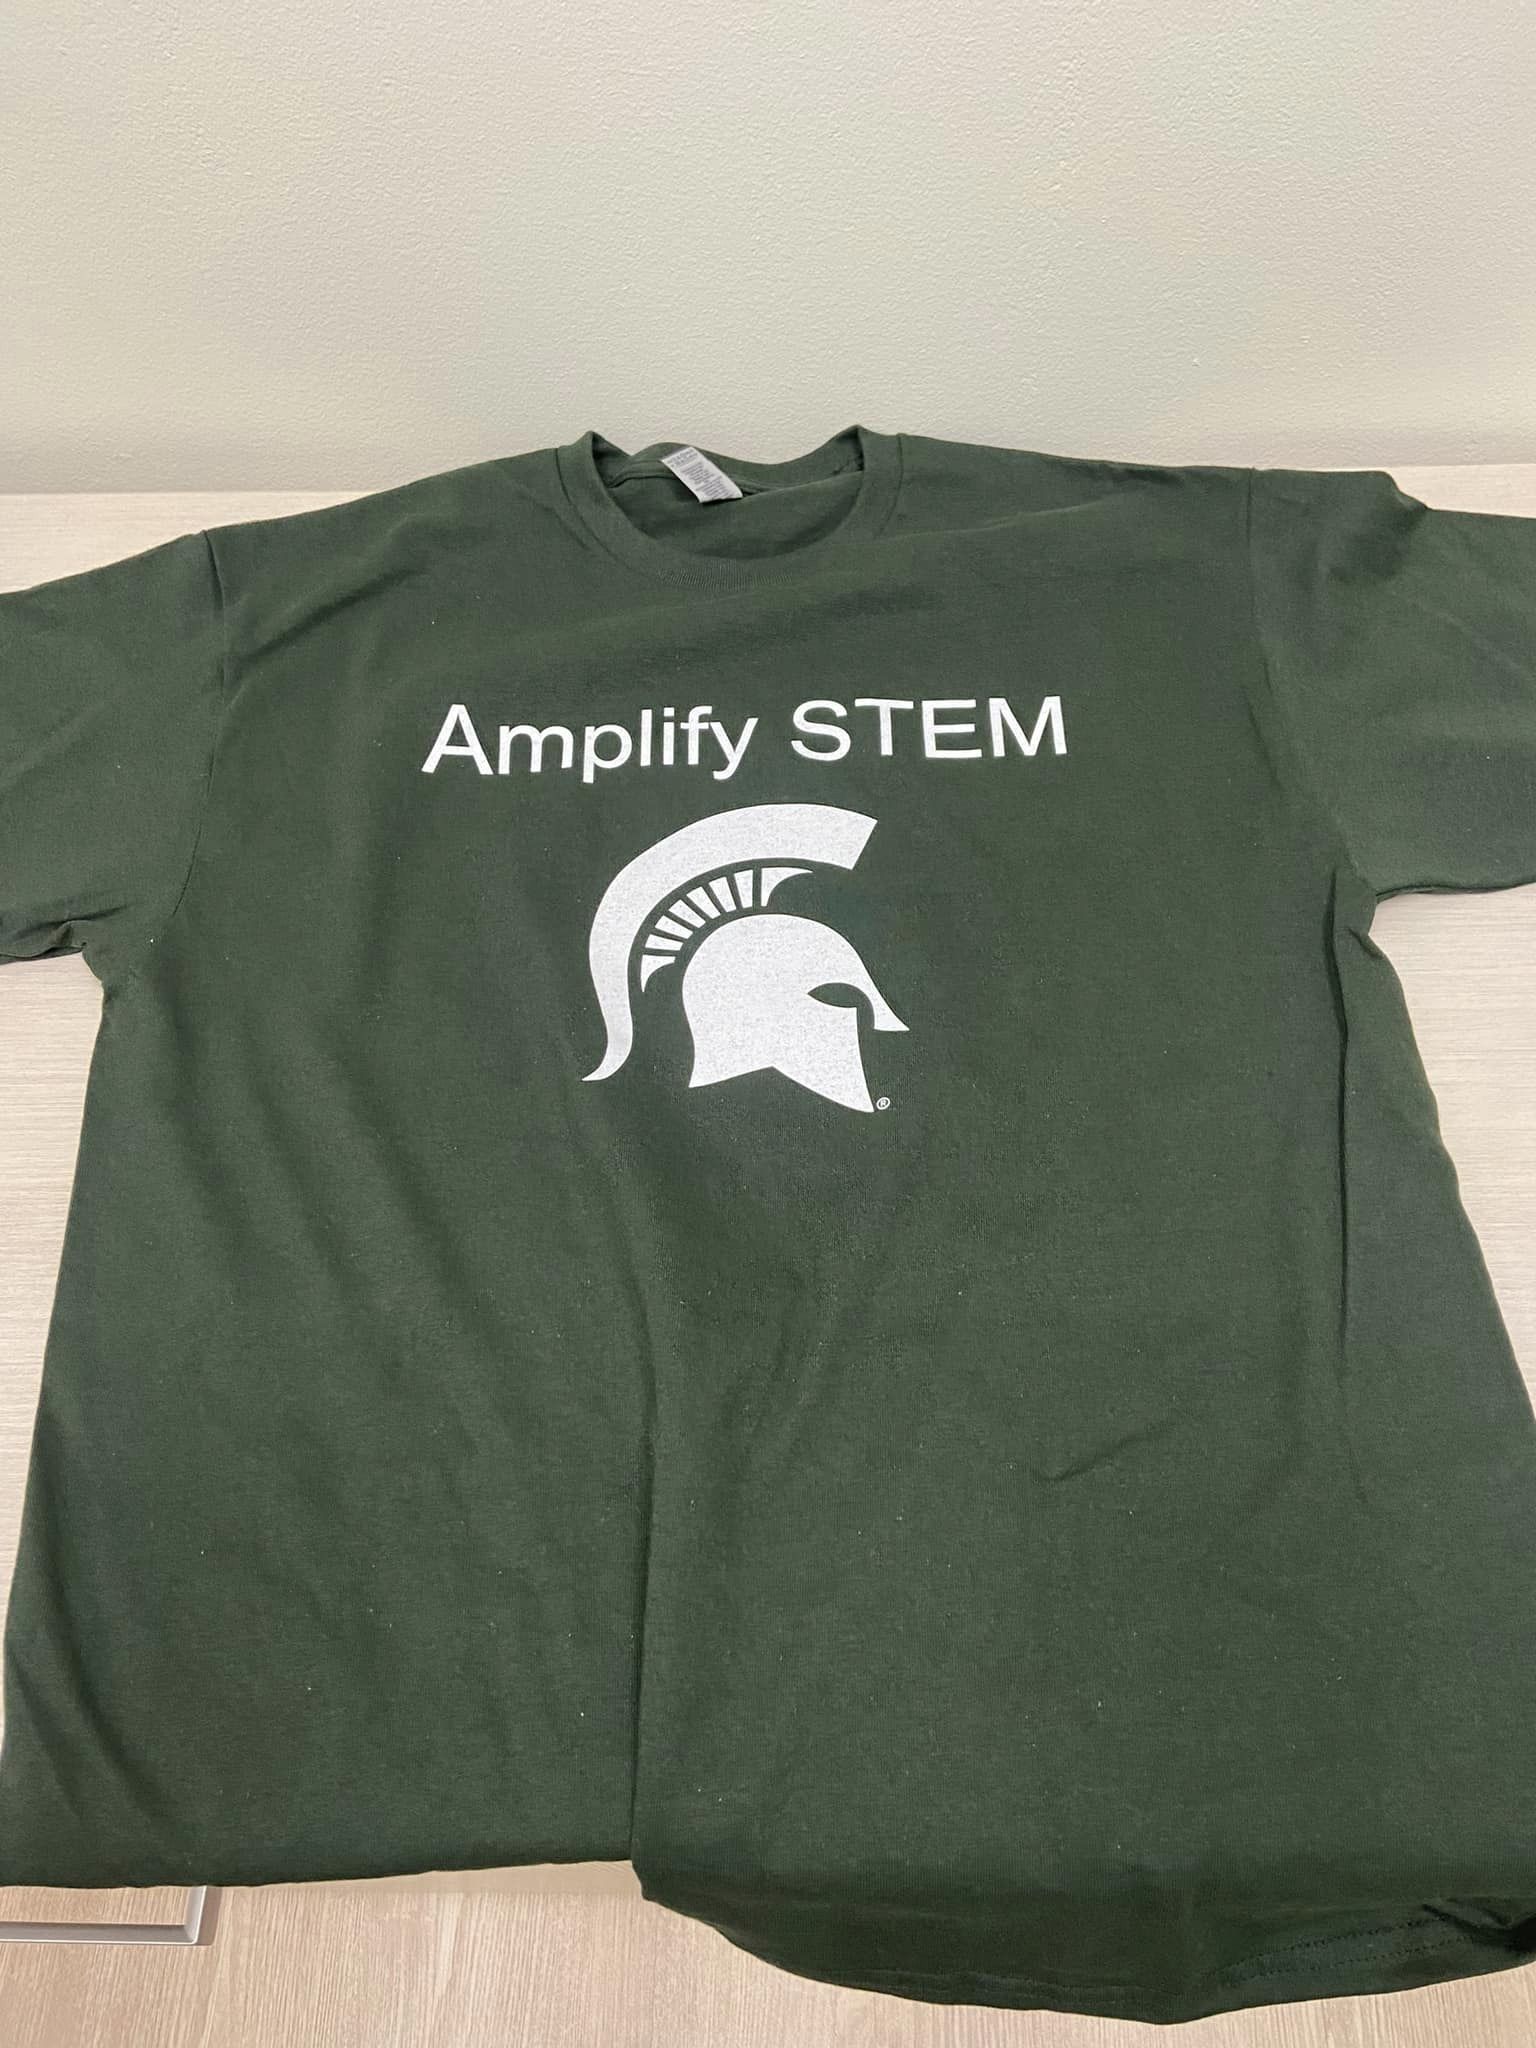 Front of the Amplify STEM t-shirt